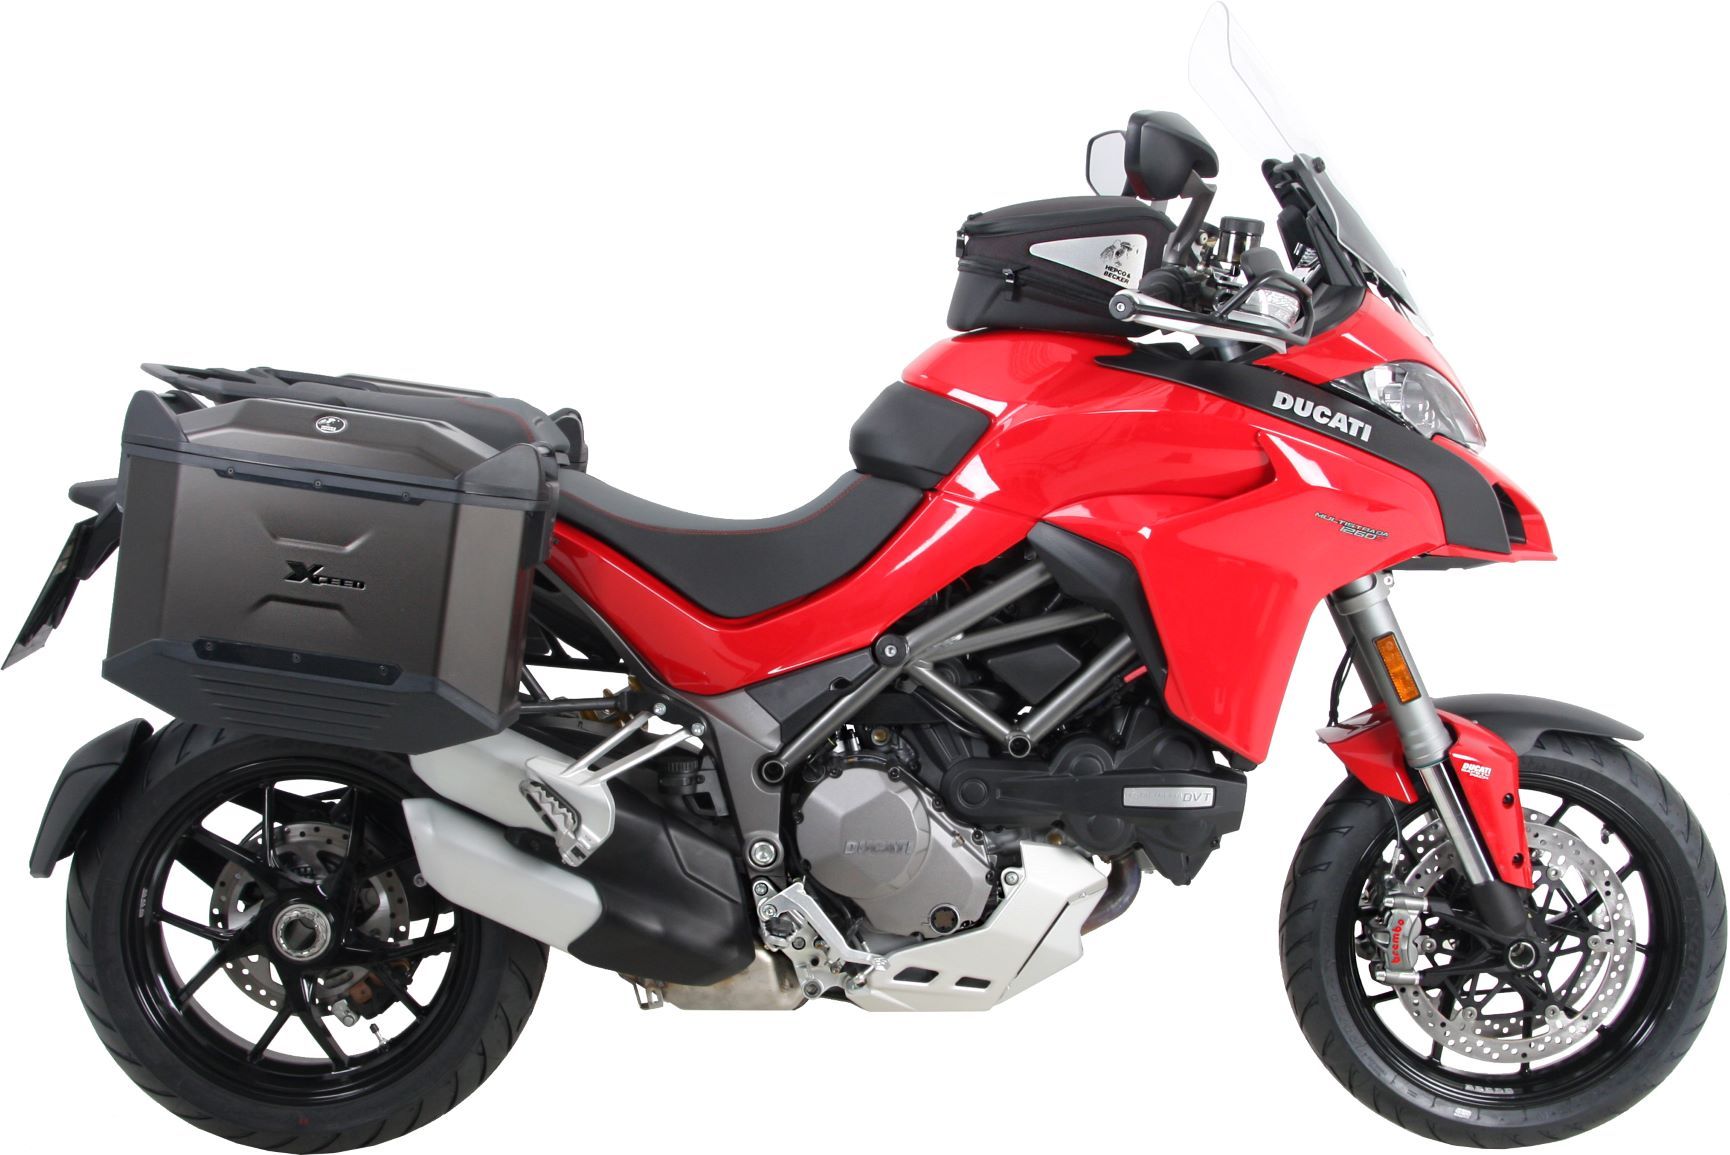 Ducati Multistrada 1260 :- New engine, better Handling and more accessories!